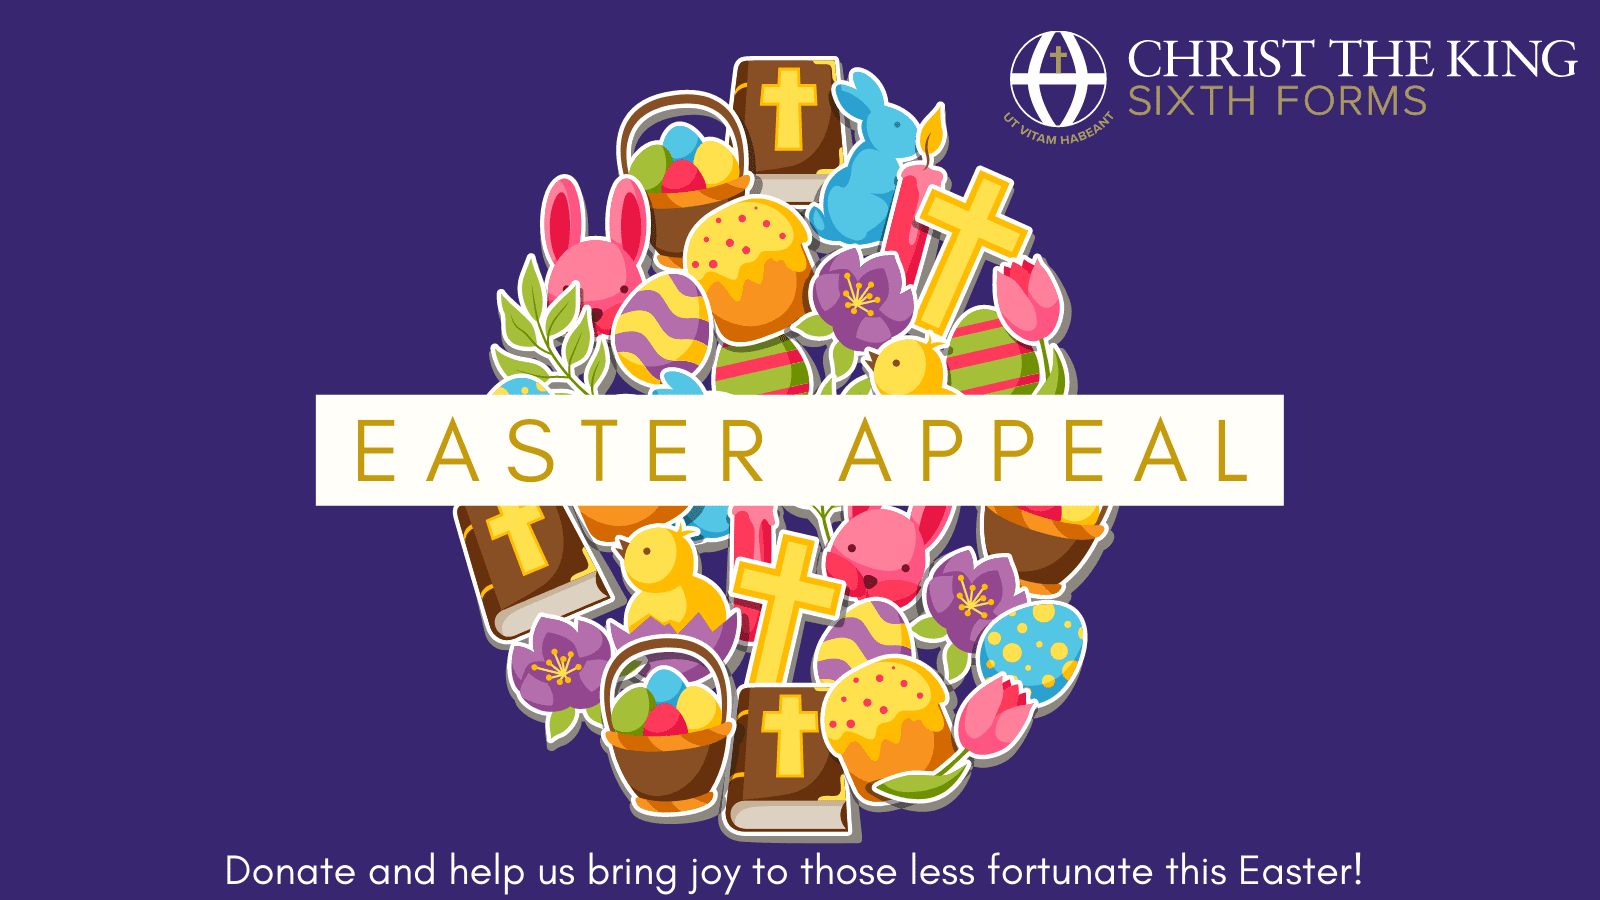 Easter Appeal Twitter Post 2